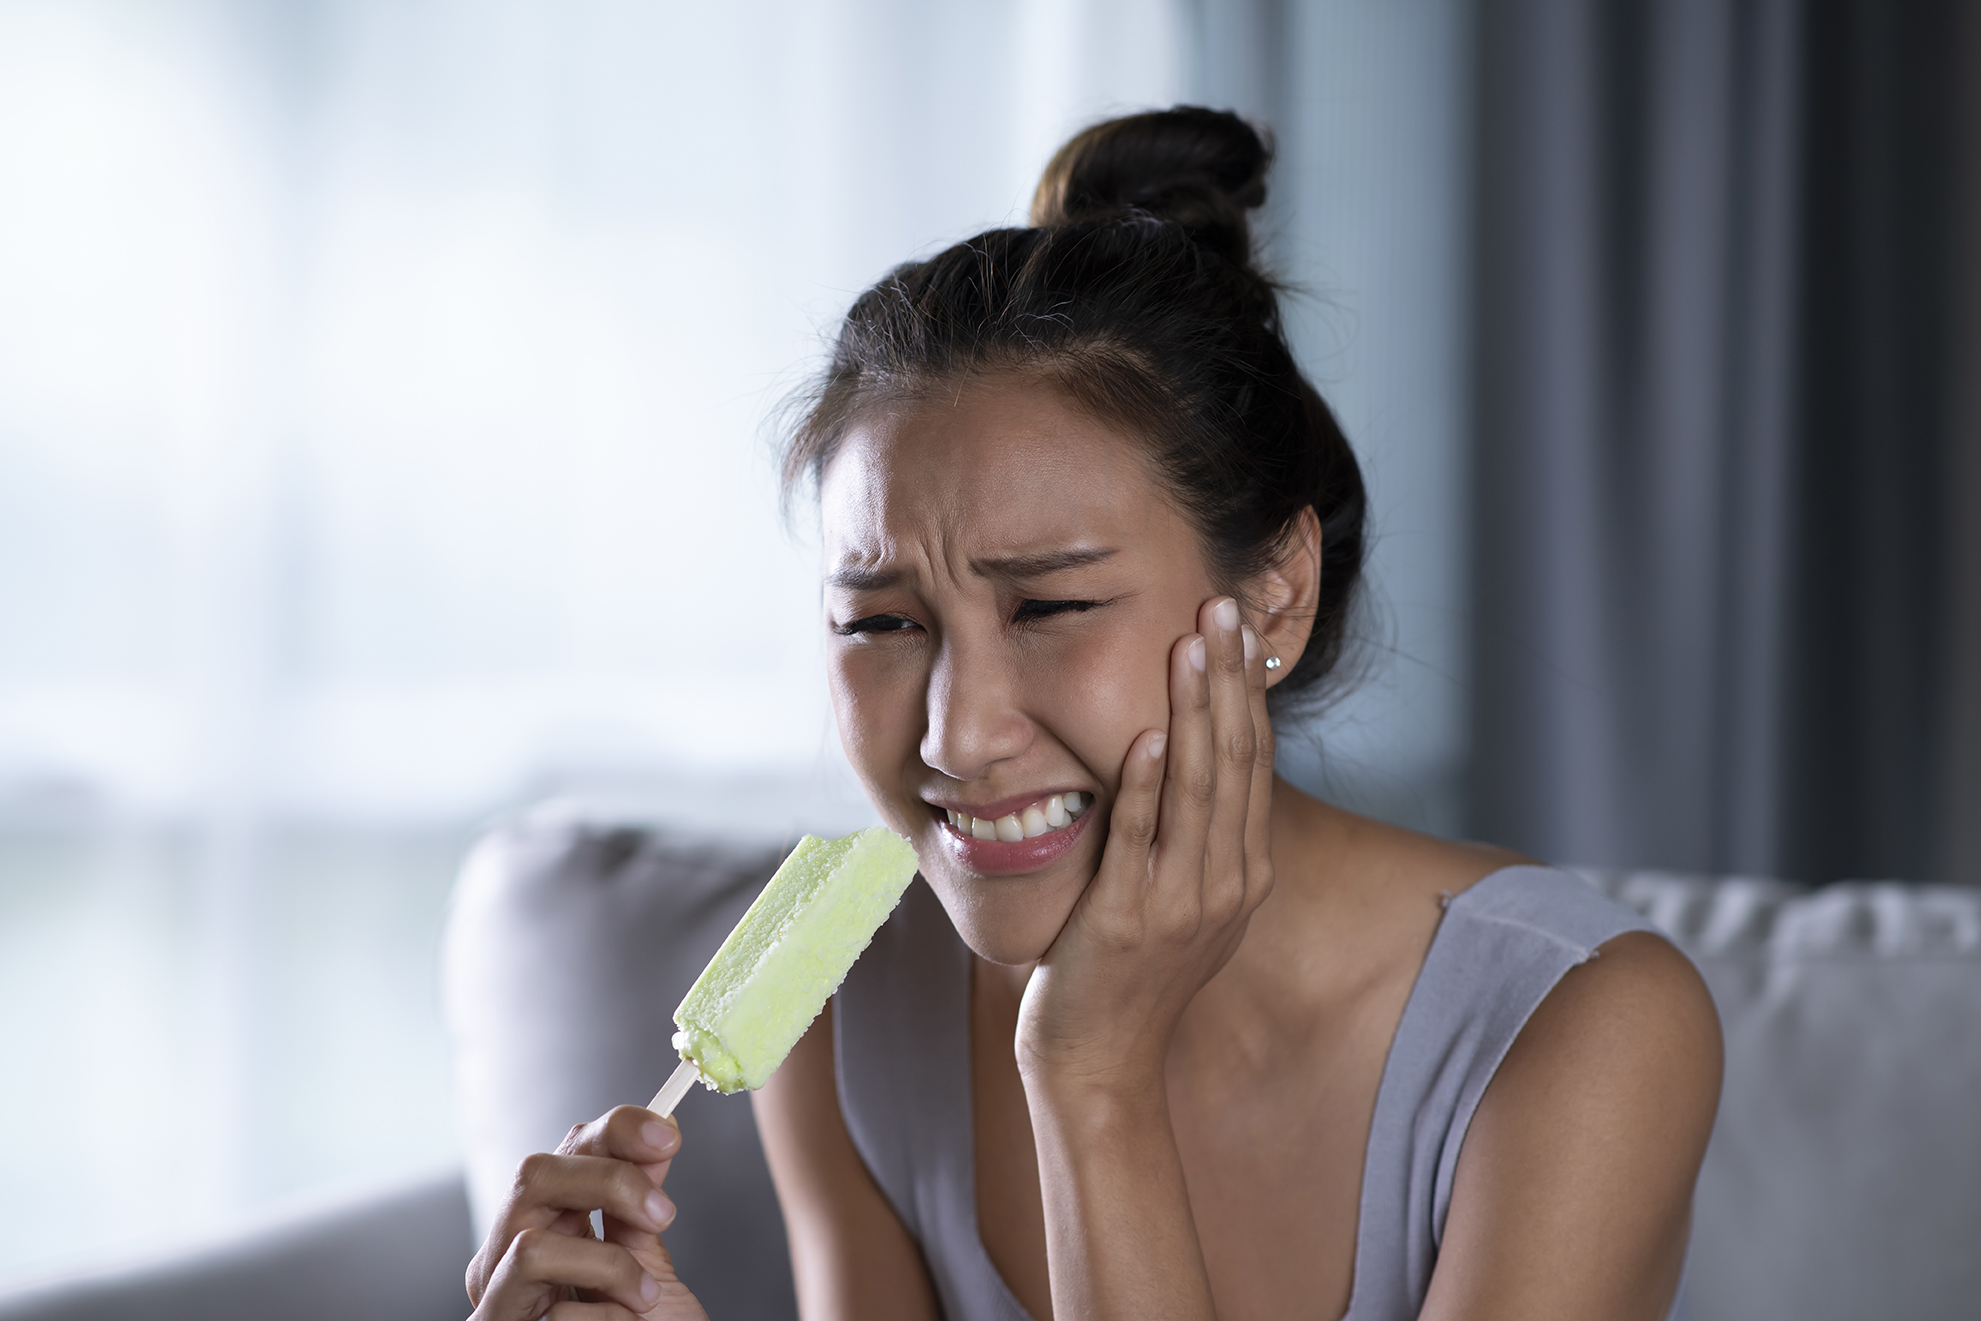 What Can I Do About Sensitive Teeth?